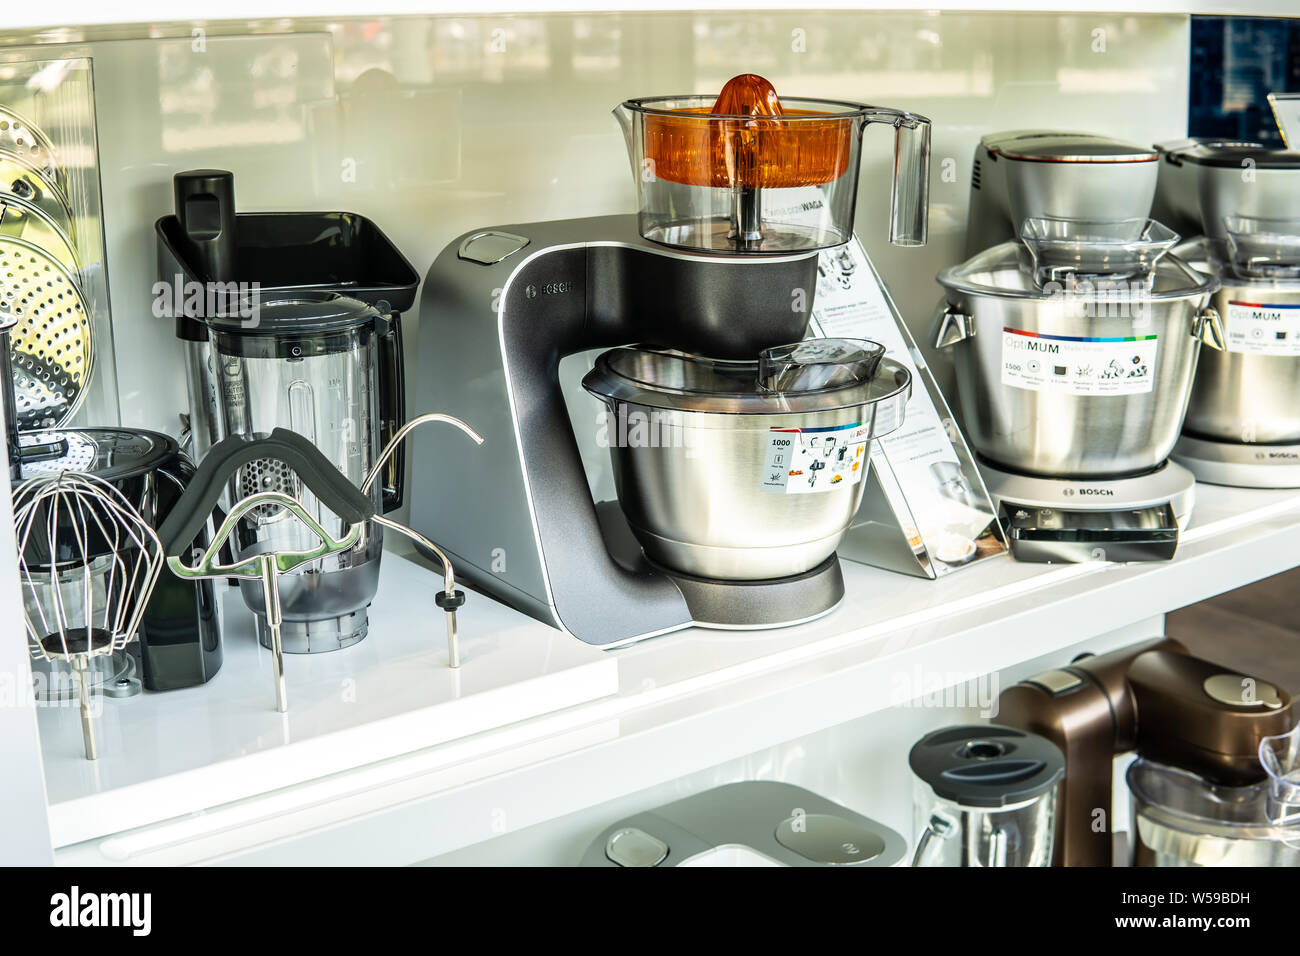 https://c8.alamy.com/comp/W59BDH/inside-bosch-showroom-bosch-food-processor-kitchen-machines-blenders-meat-grinders-toaster-kettle-for-perfect-cooking-experience-W59BDH.jpg